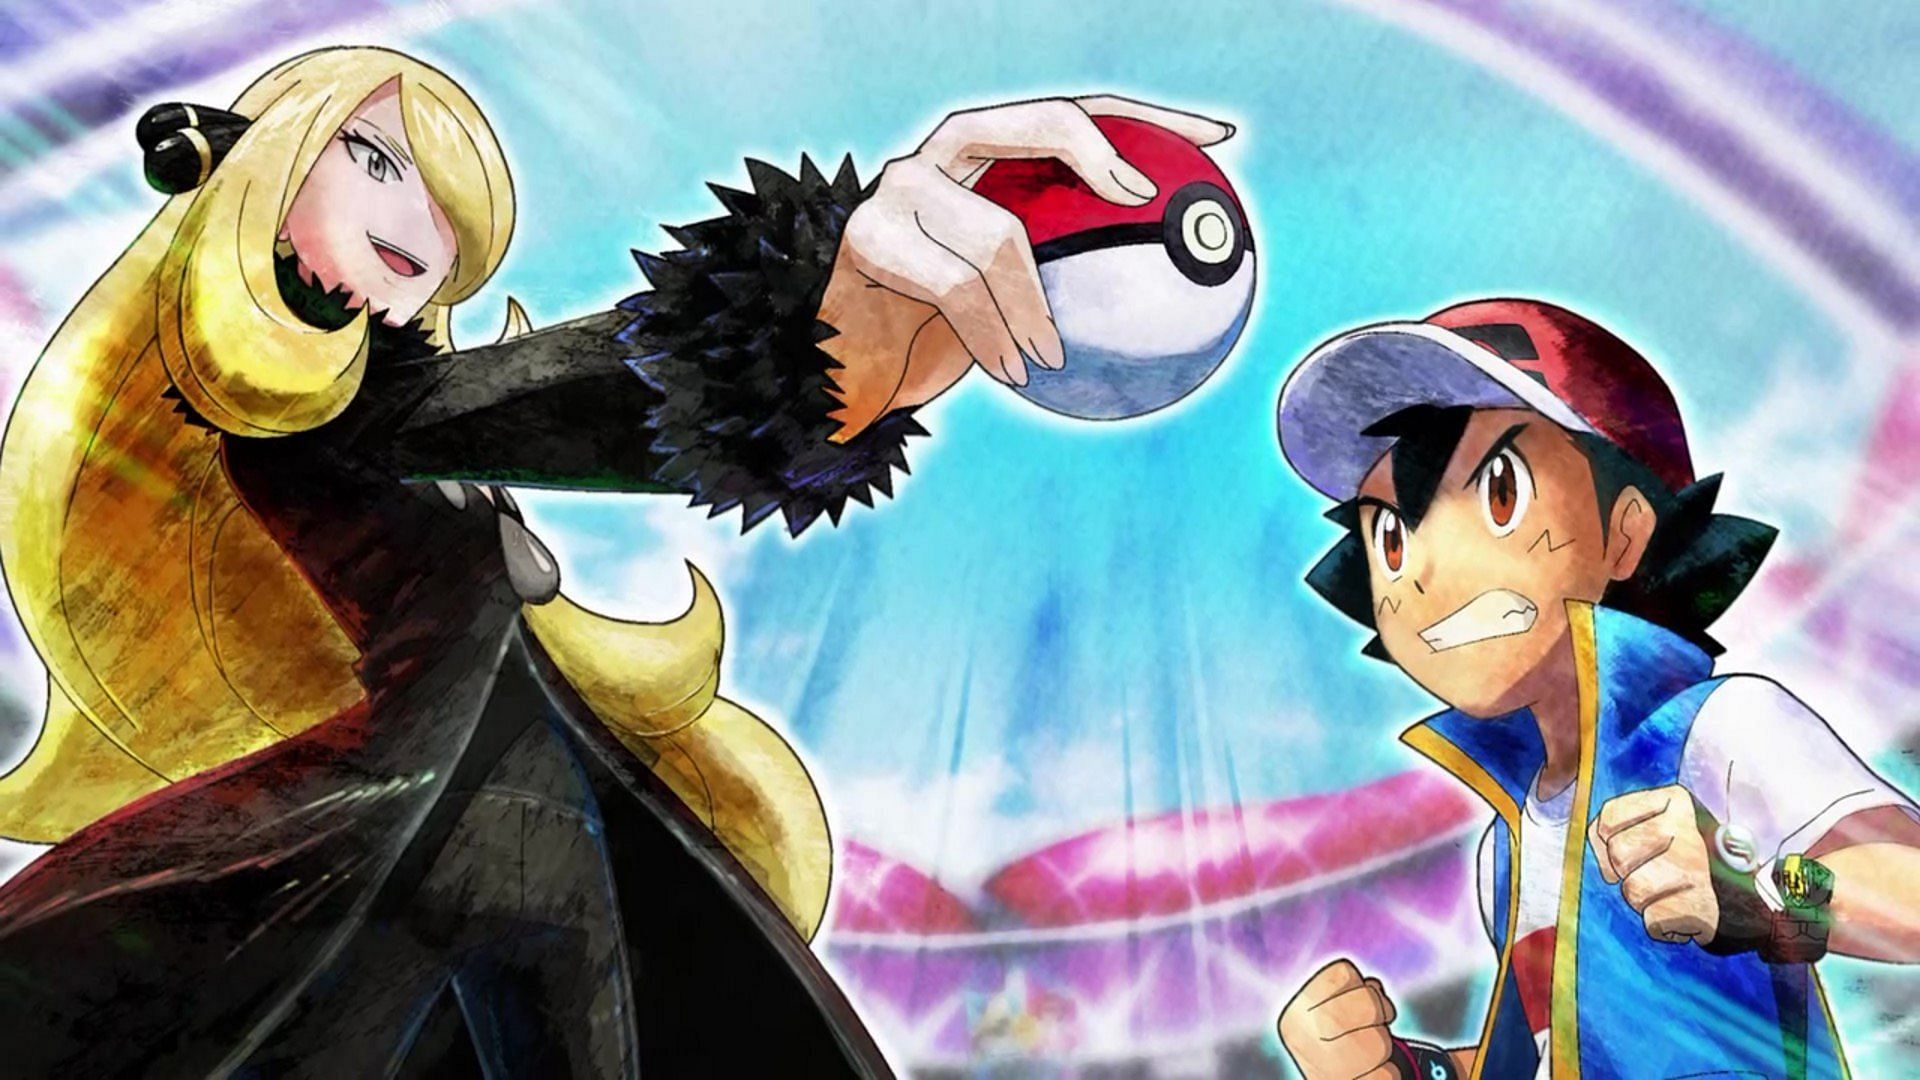 New Pokémon Ultimate Journeys: The Series episodes coming to Netflix soon -  Polygon